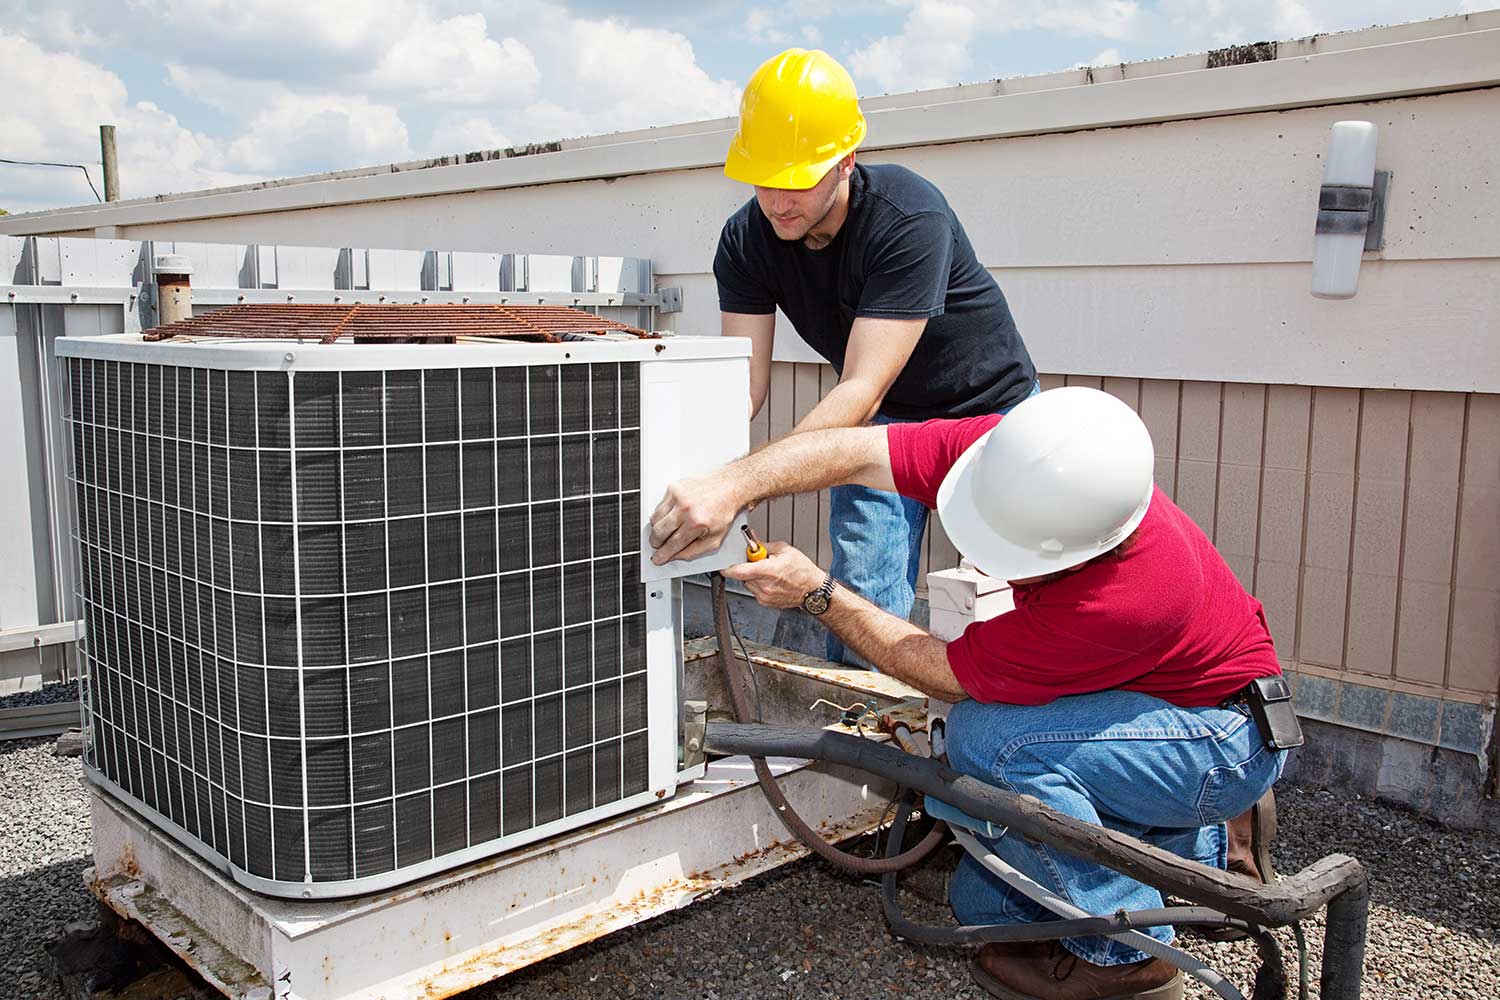 Installing a current climate control system